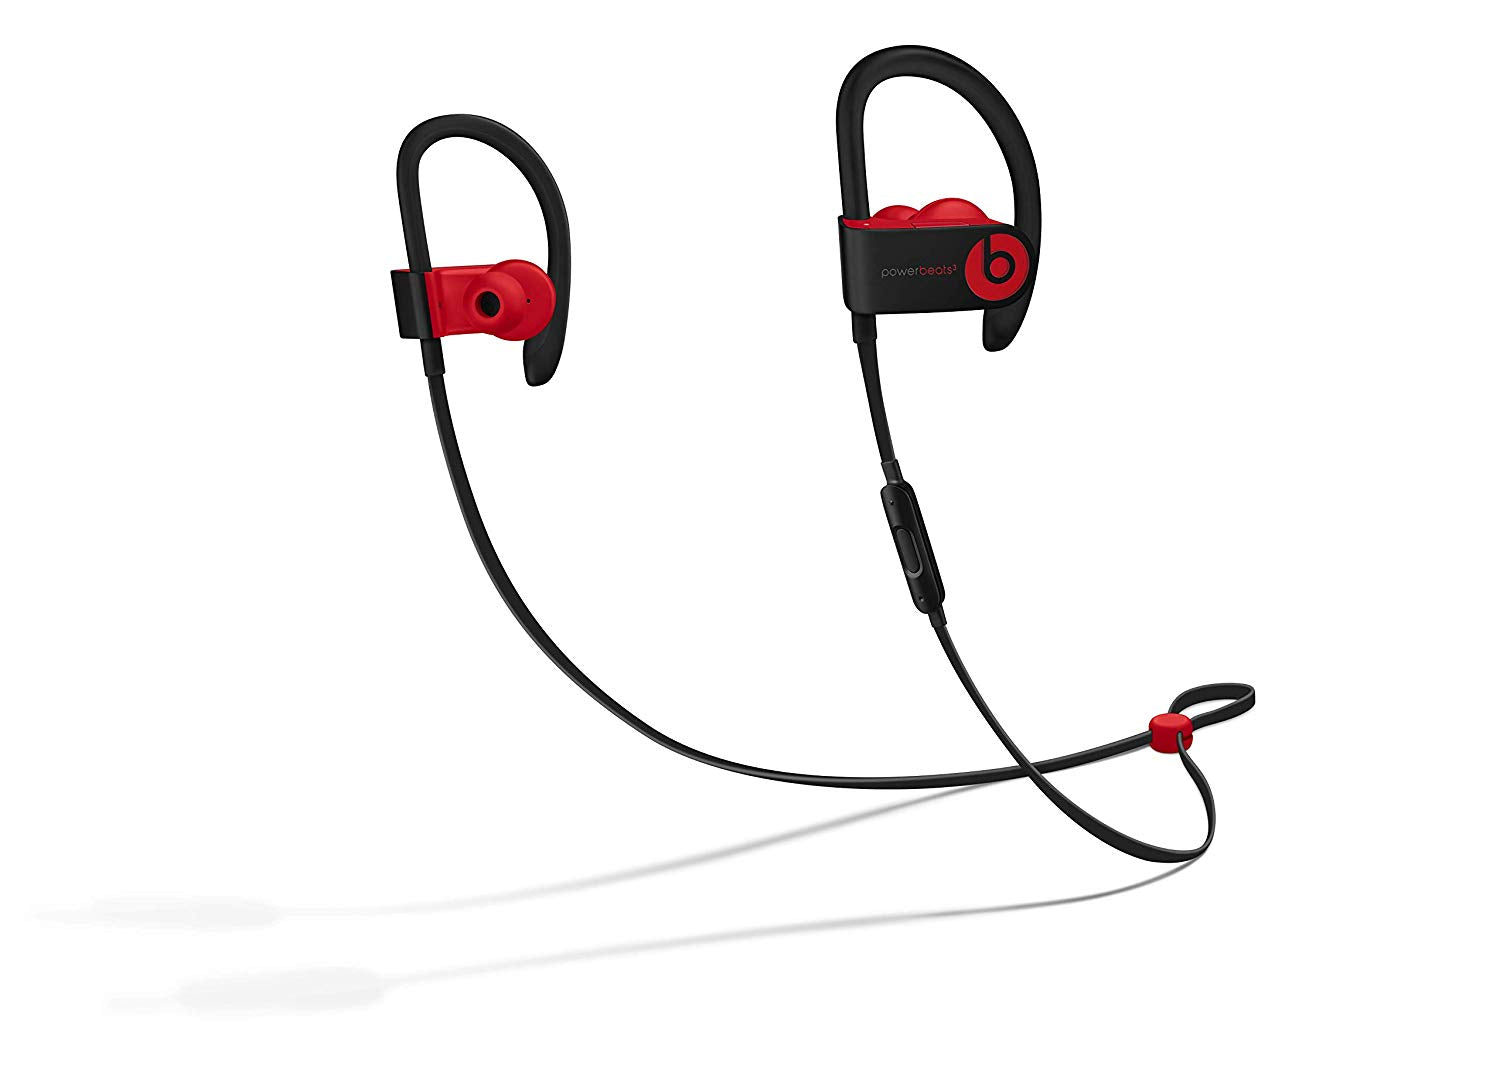 red and black wireless beats